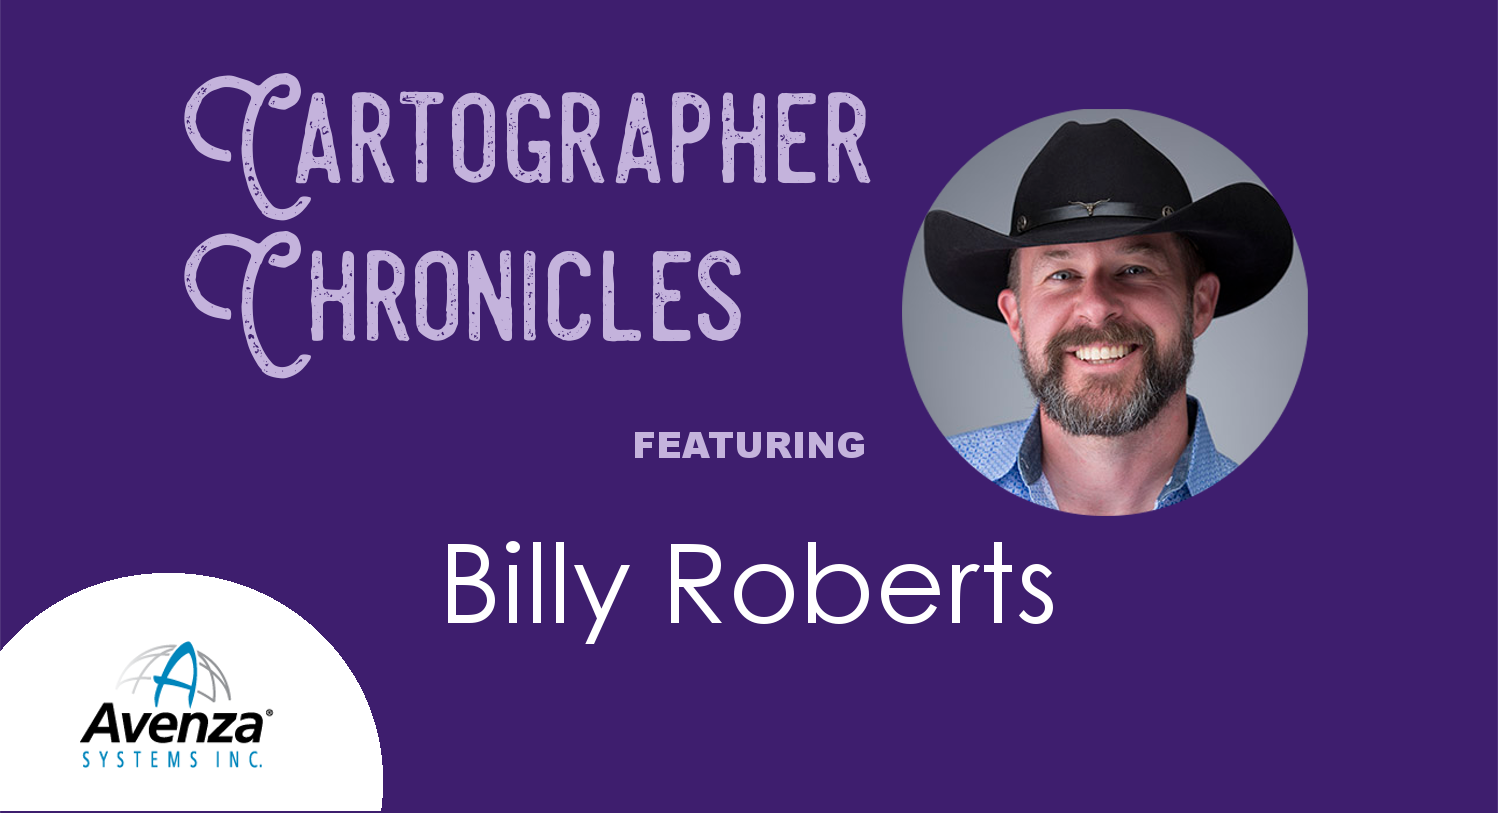 Cartographer Chronicles Billy Roberts